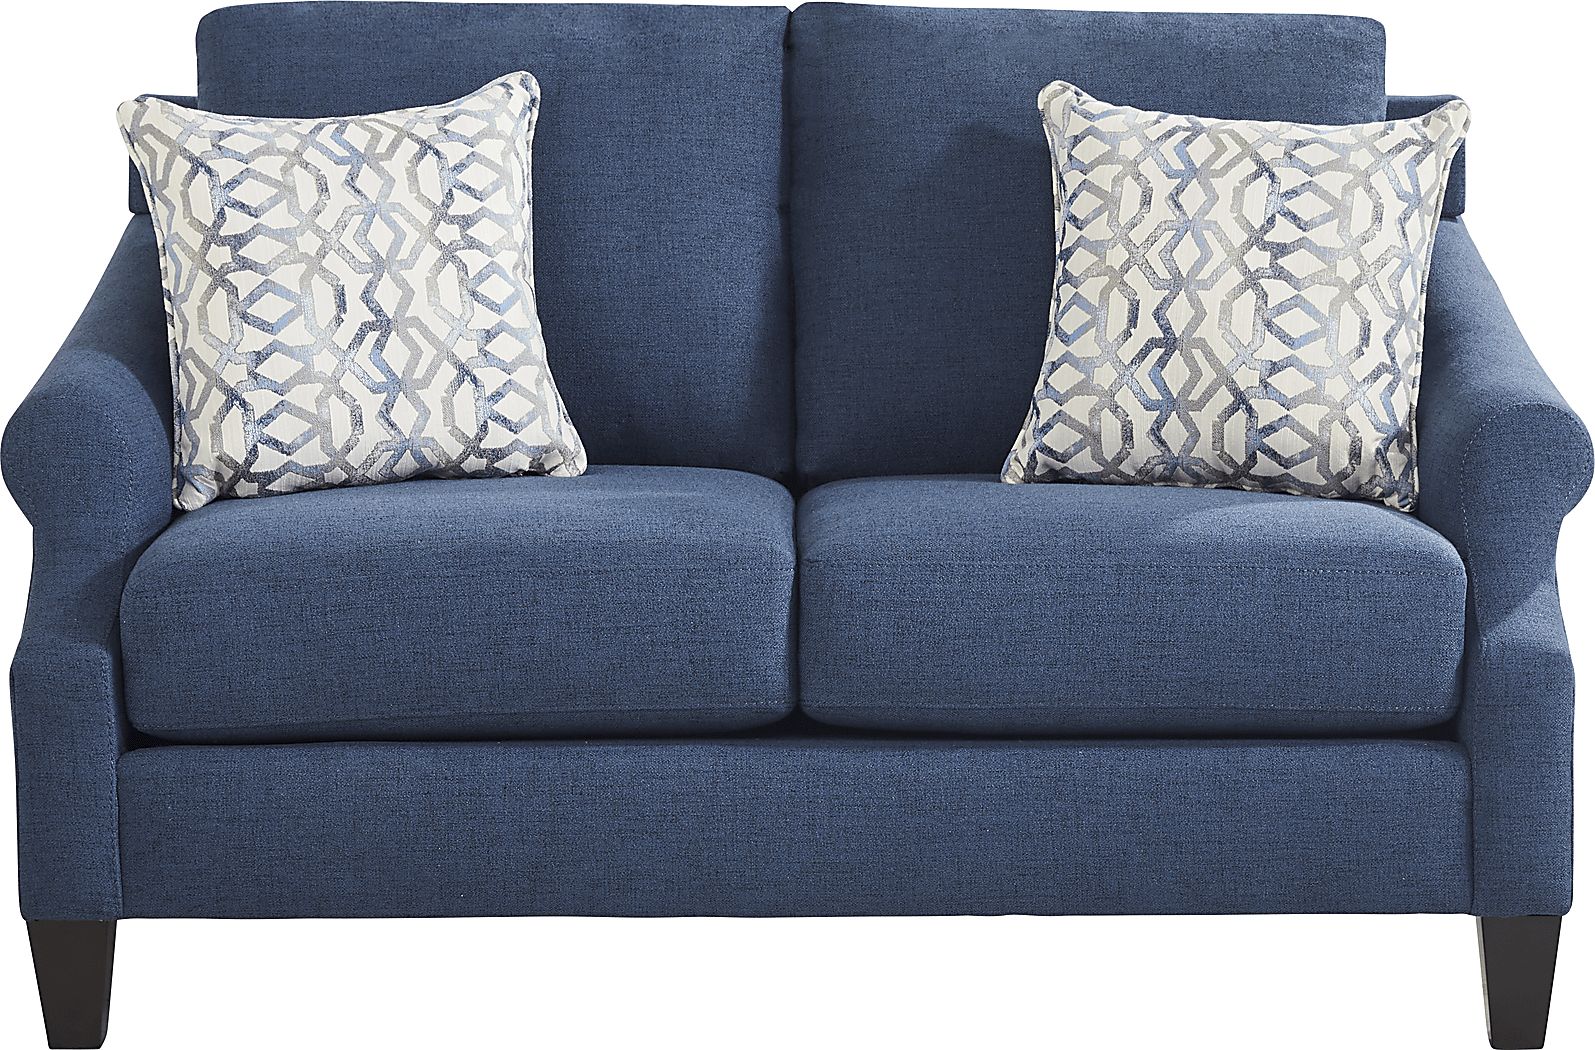 Westerfield Blue 2 Pc Living Room